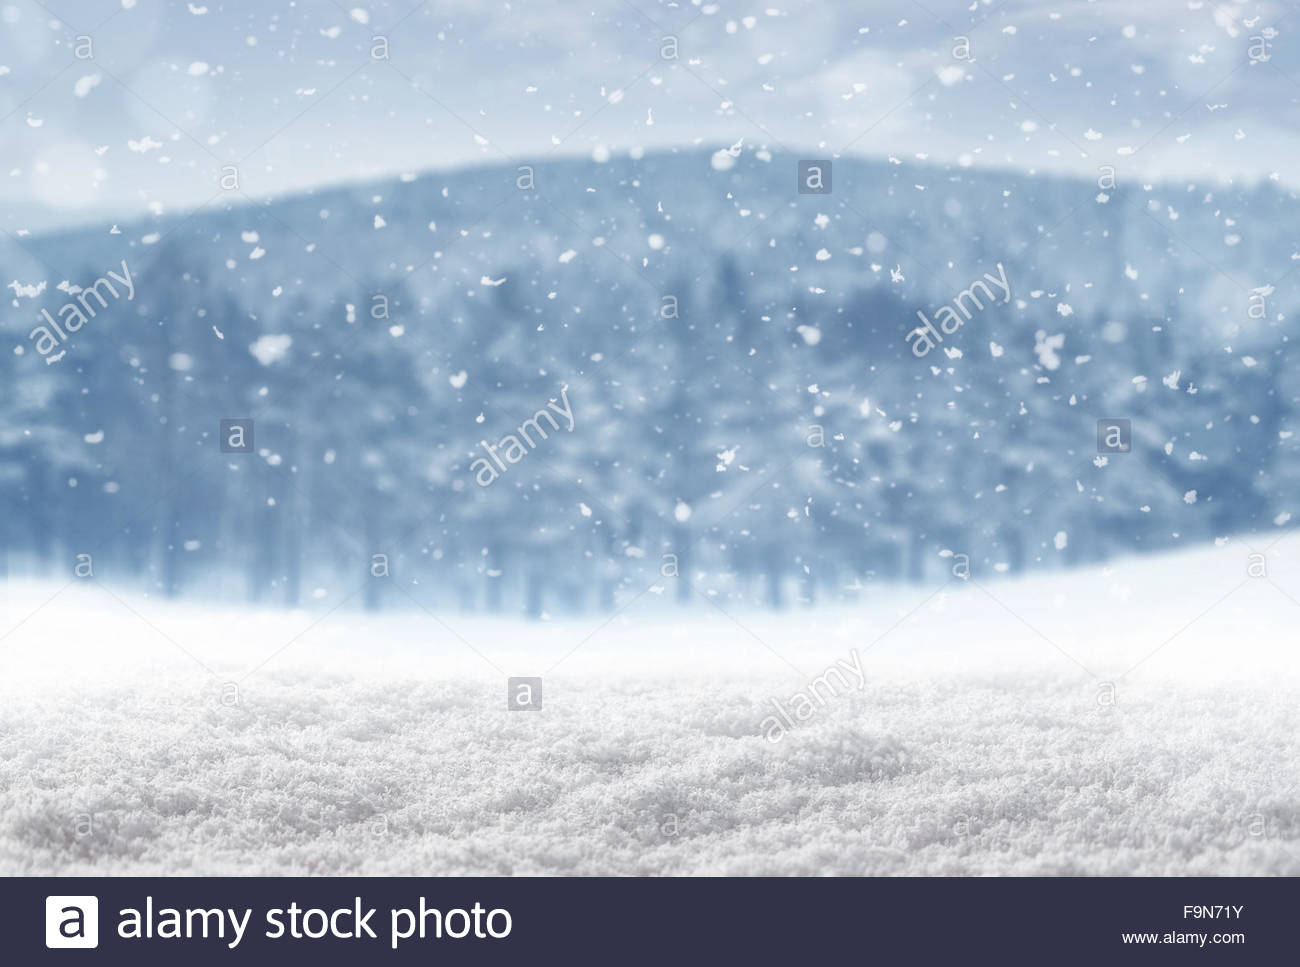 Winter Background Falling Snow Over Landscape With Copy